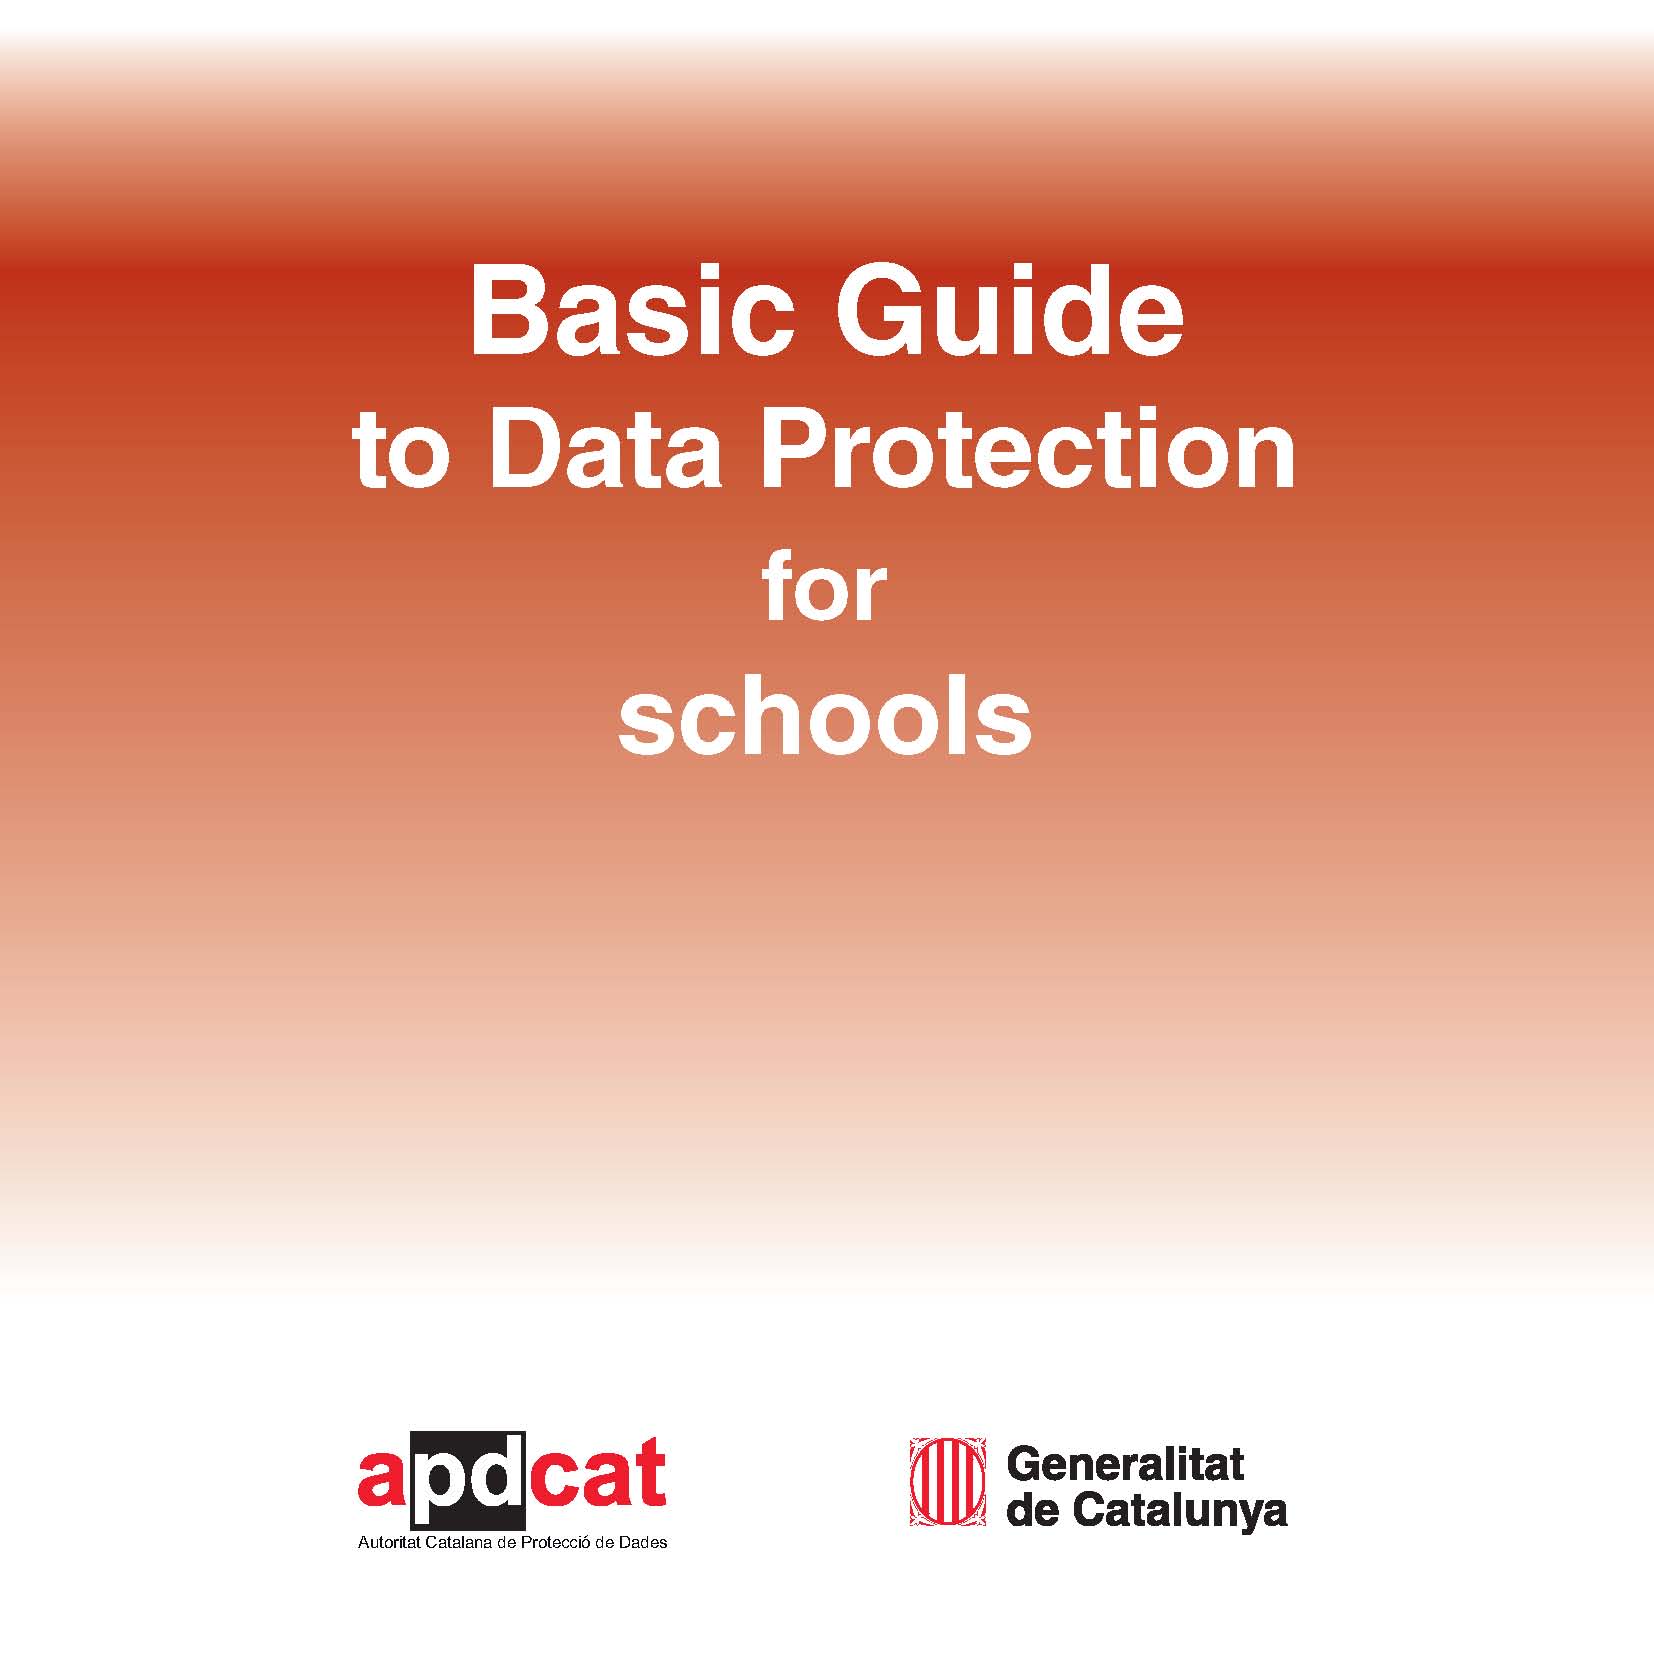 Basic Guide to Data Protection of schools